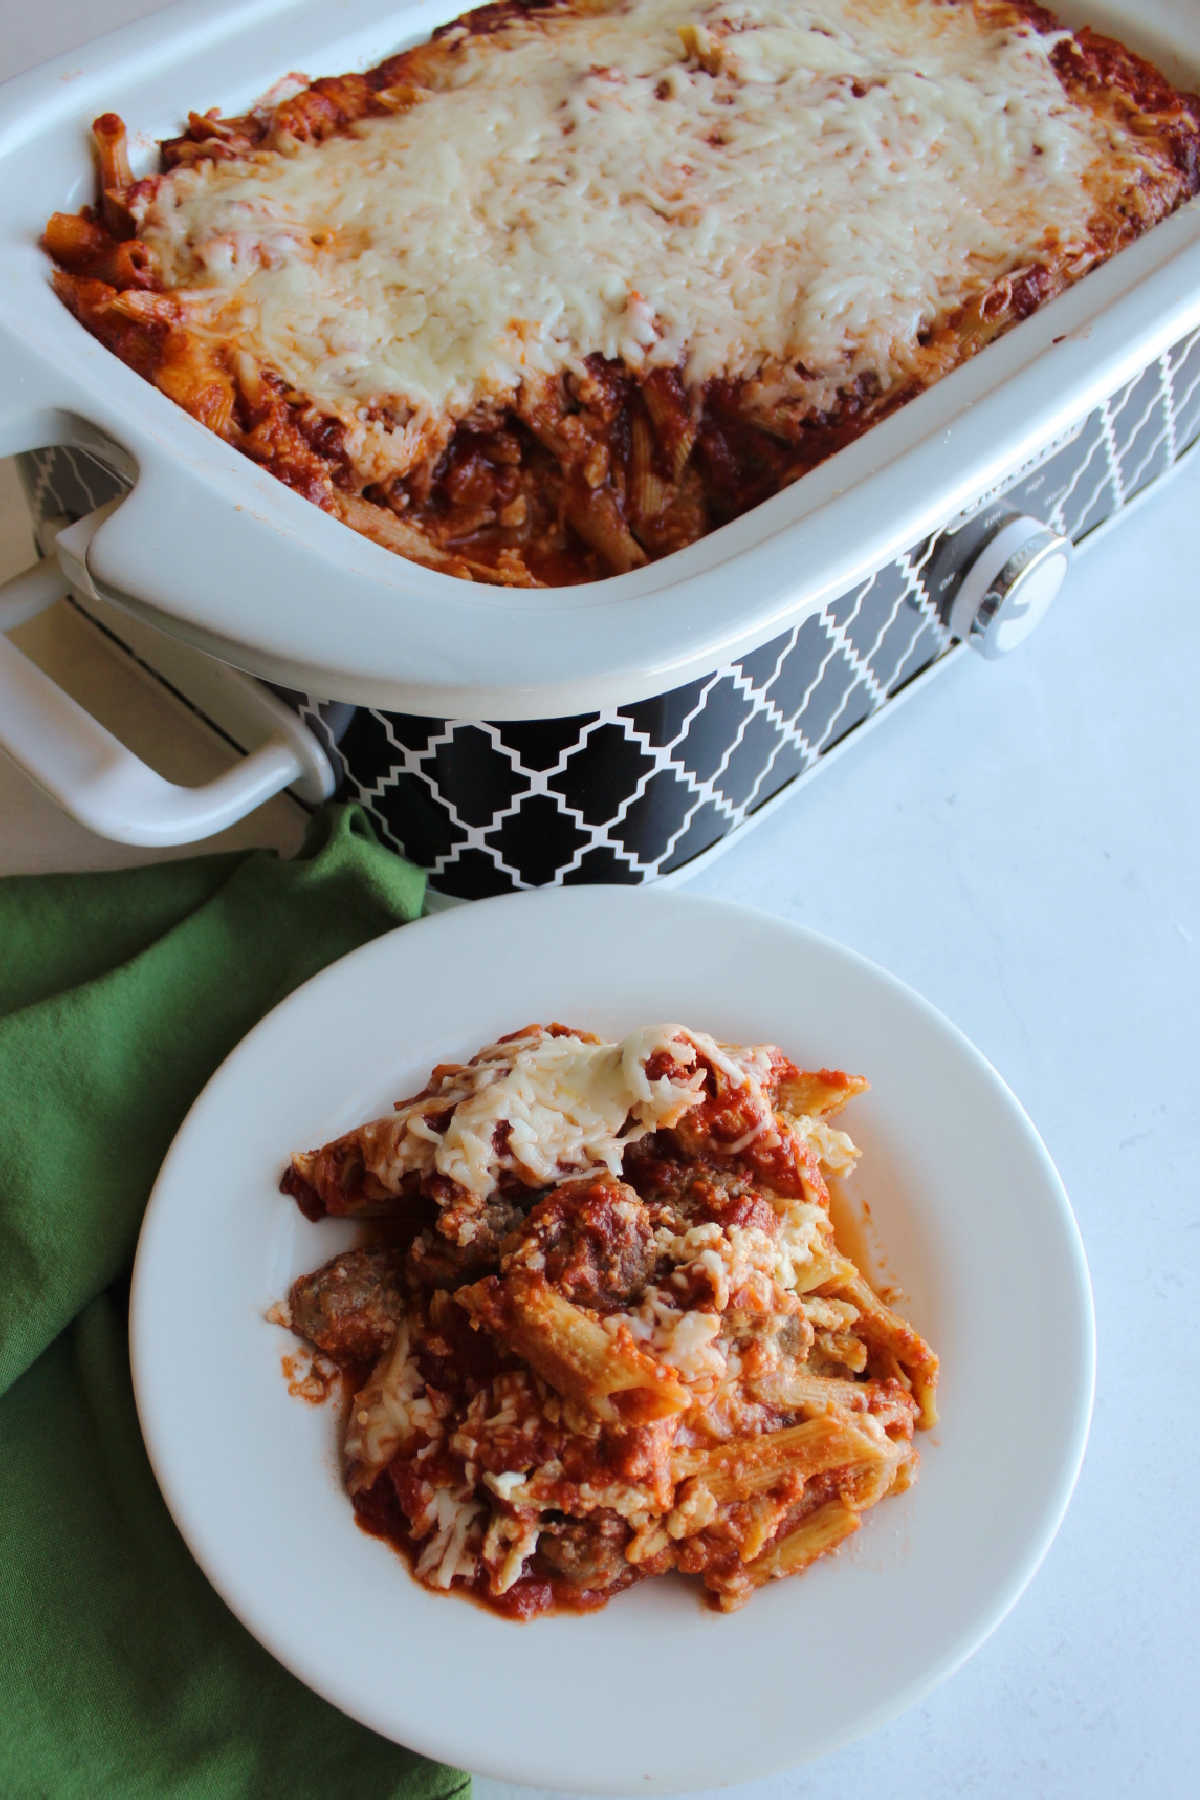 Baked penne with Italian sausage and cheese next to slow cooker filled with more baked pasta.